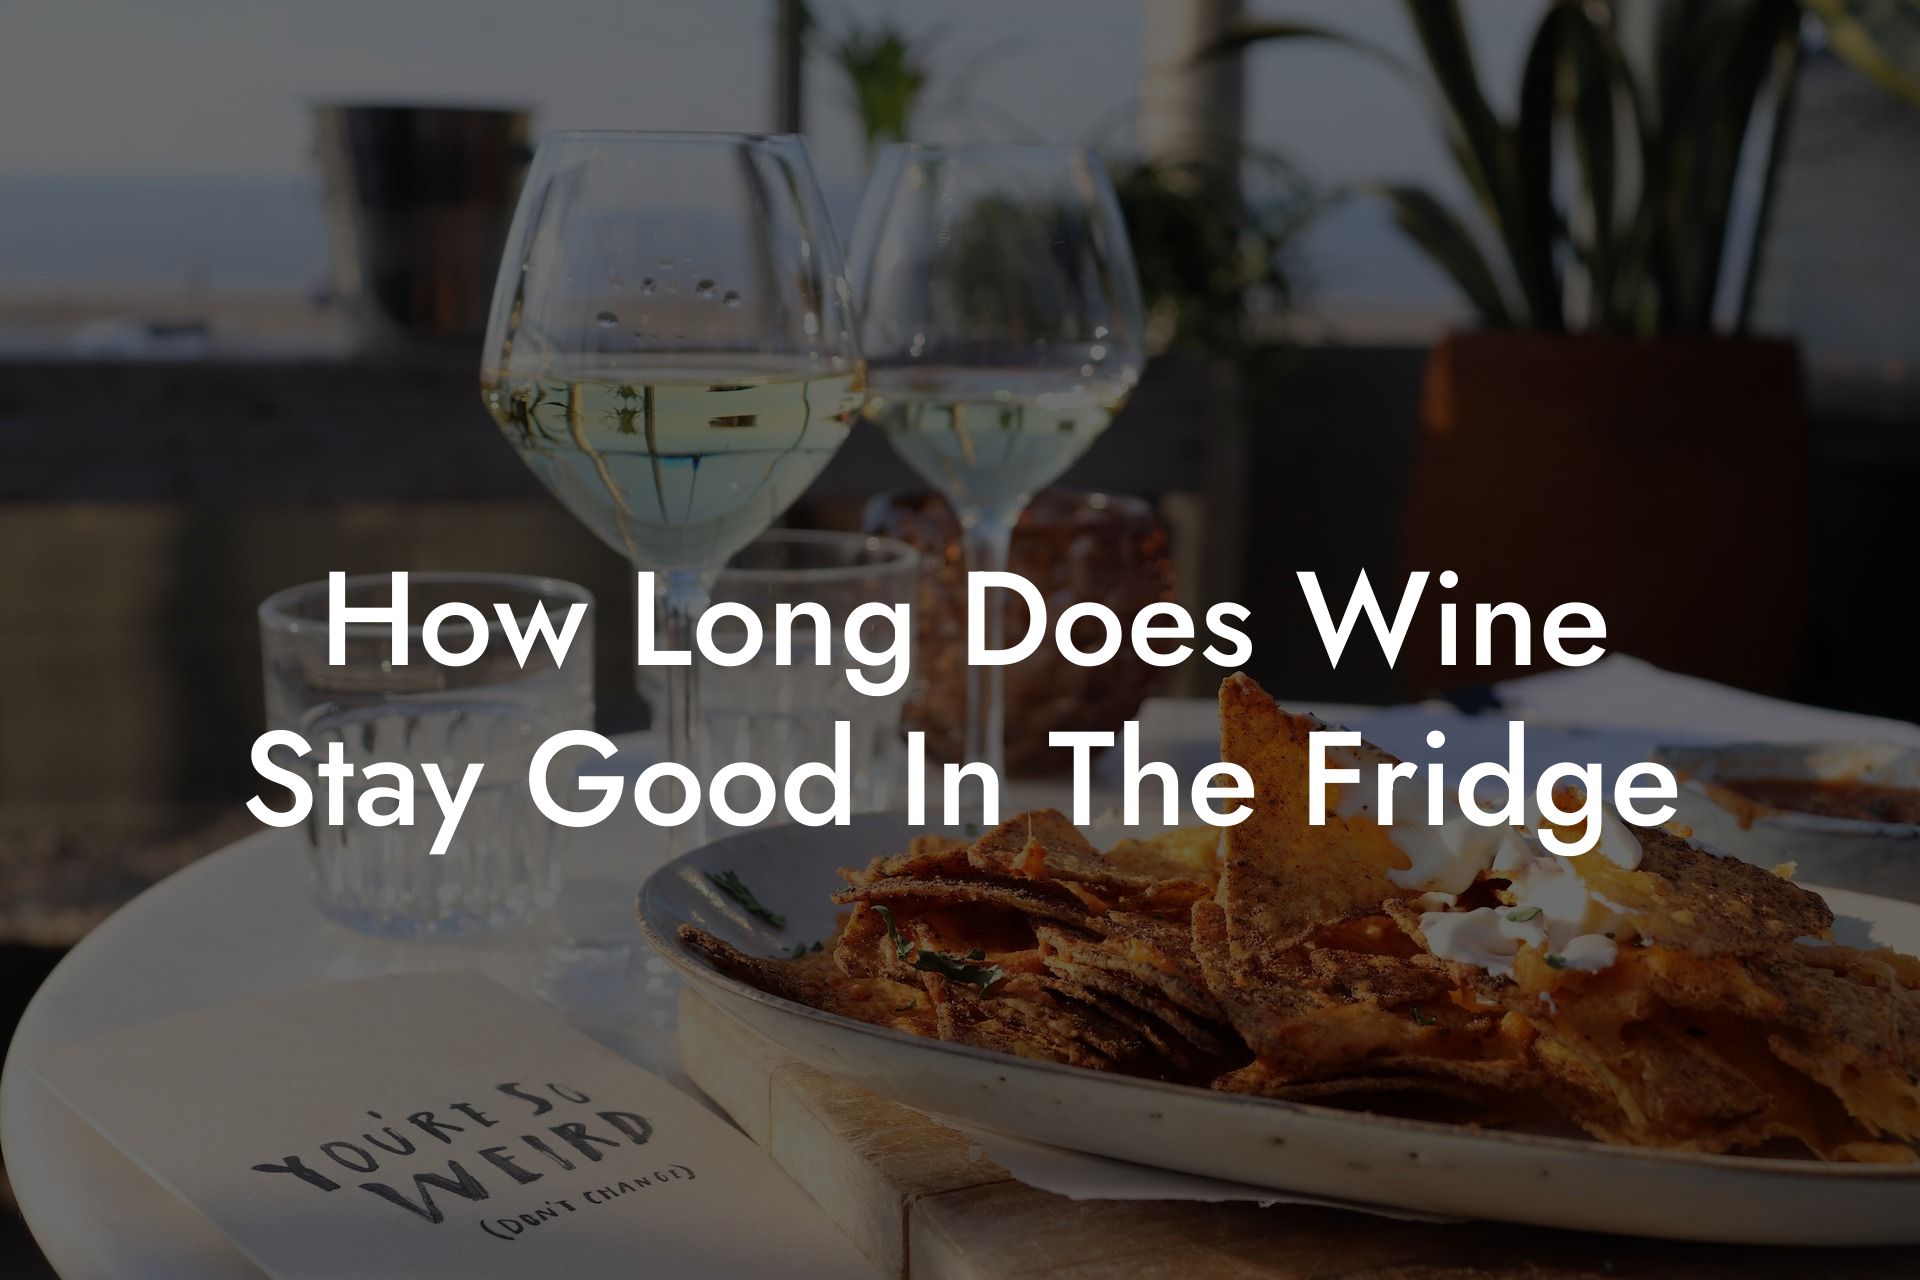 How Long Does Wine Stay Good In The Fridge